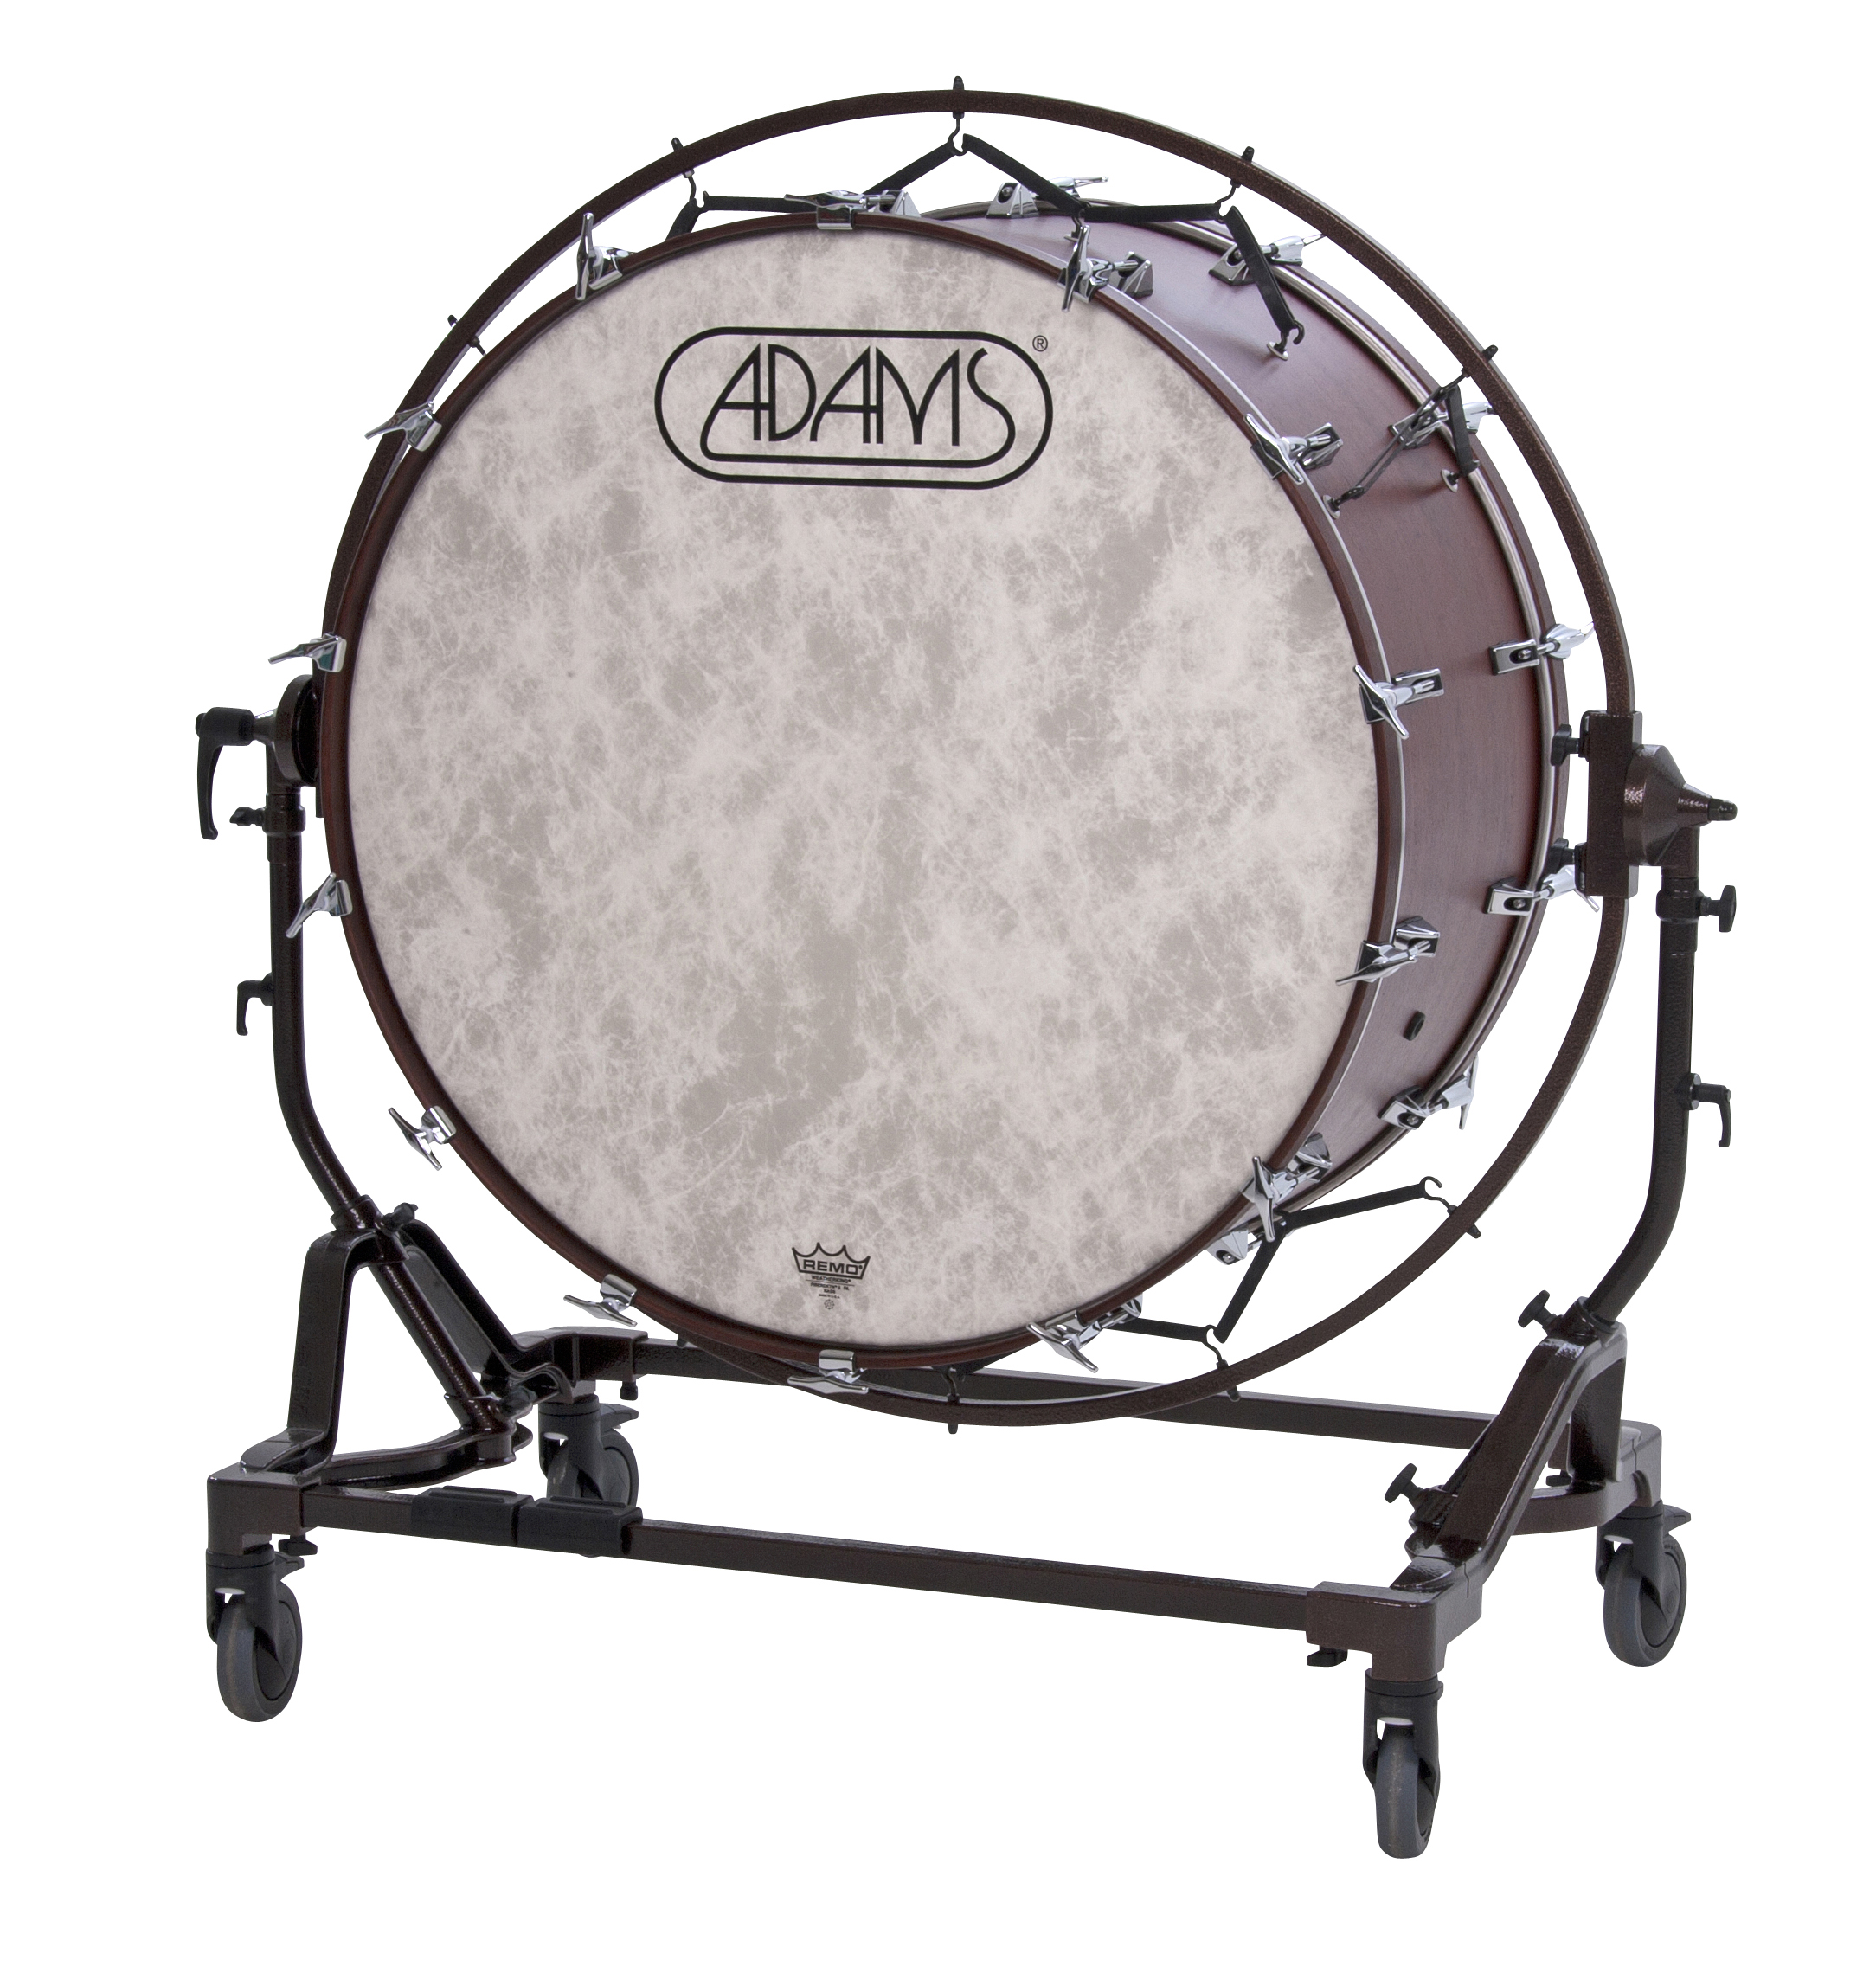 Free Suspended Bass Drum 32” x 18”